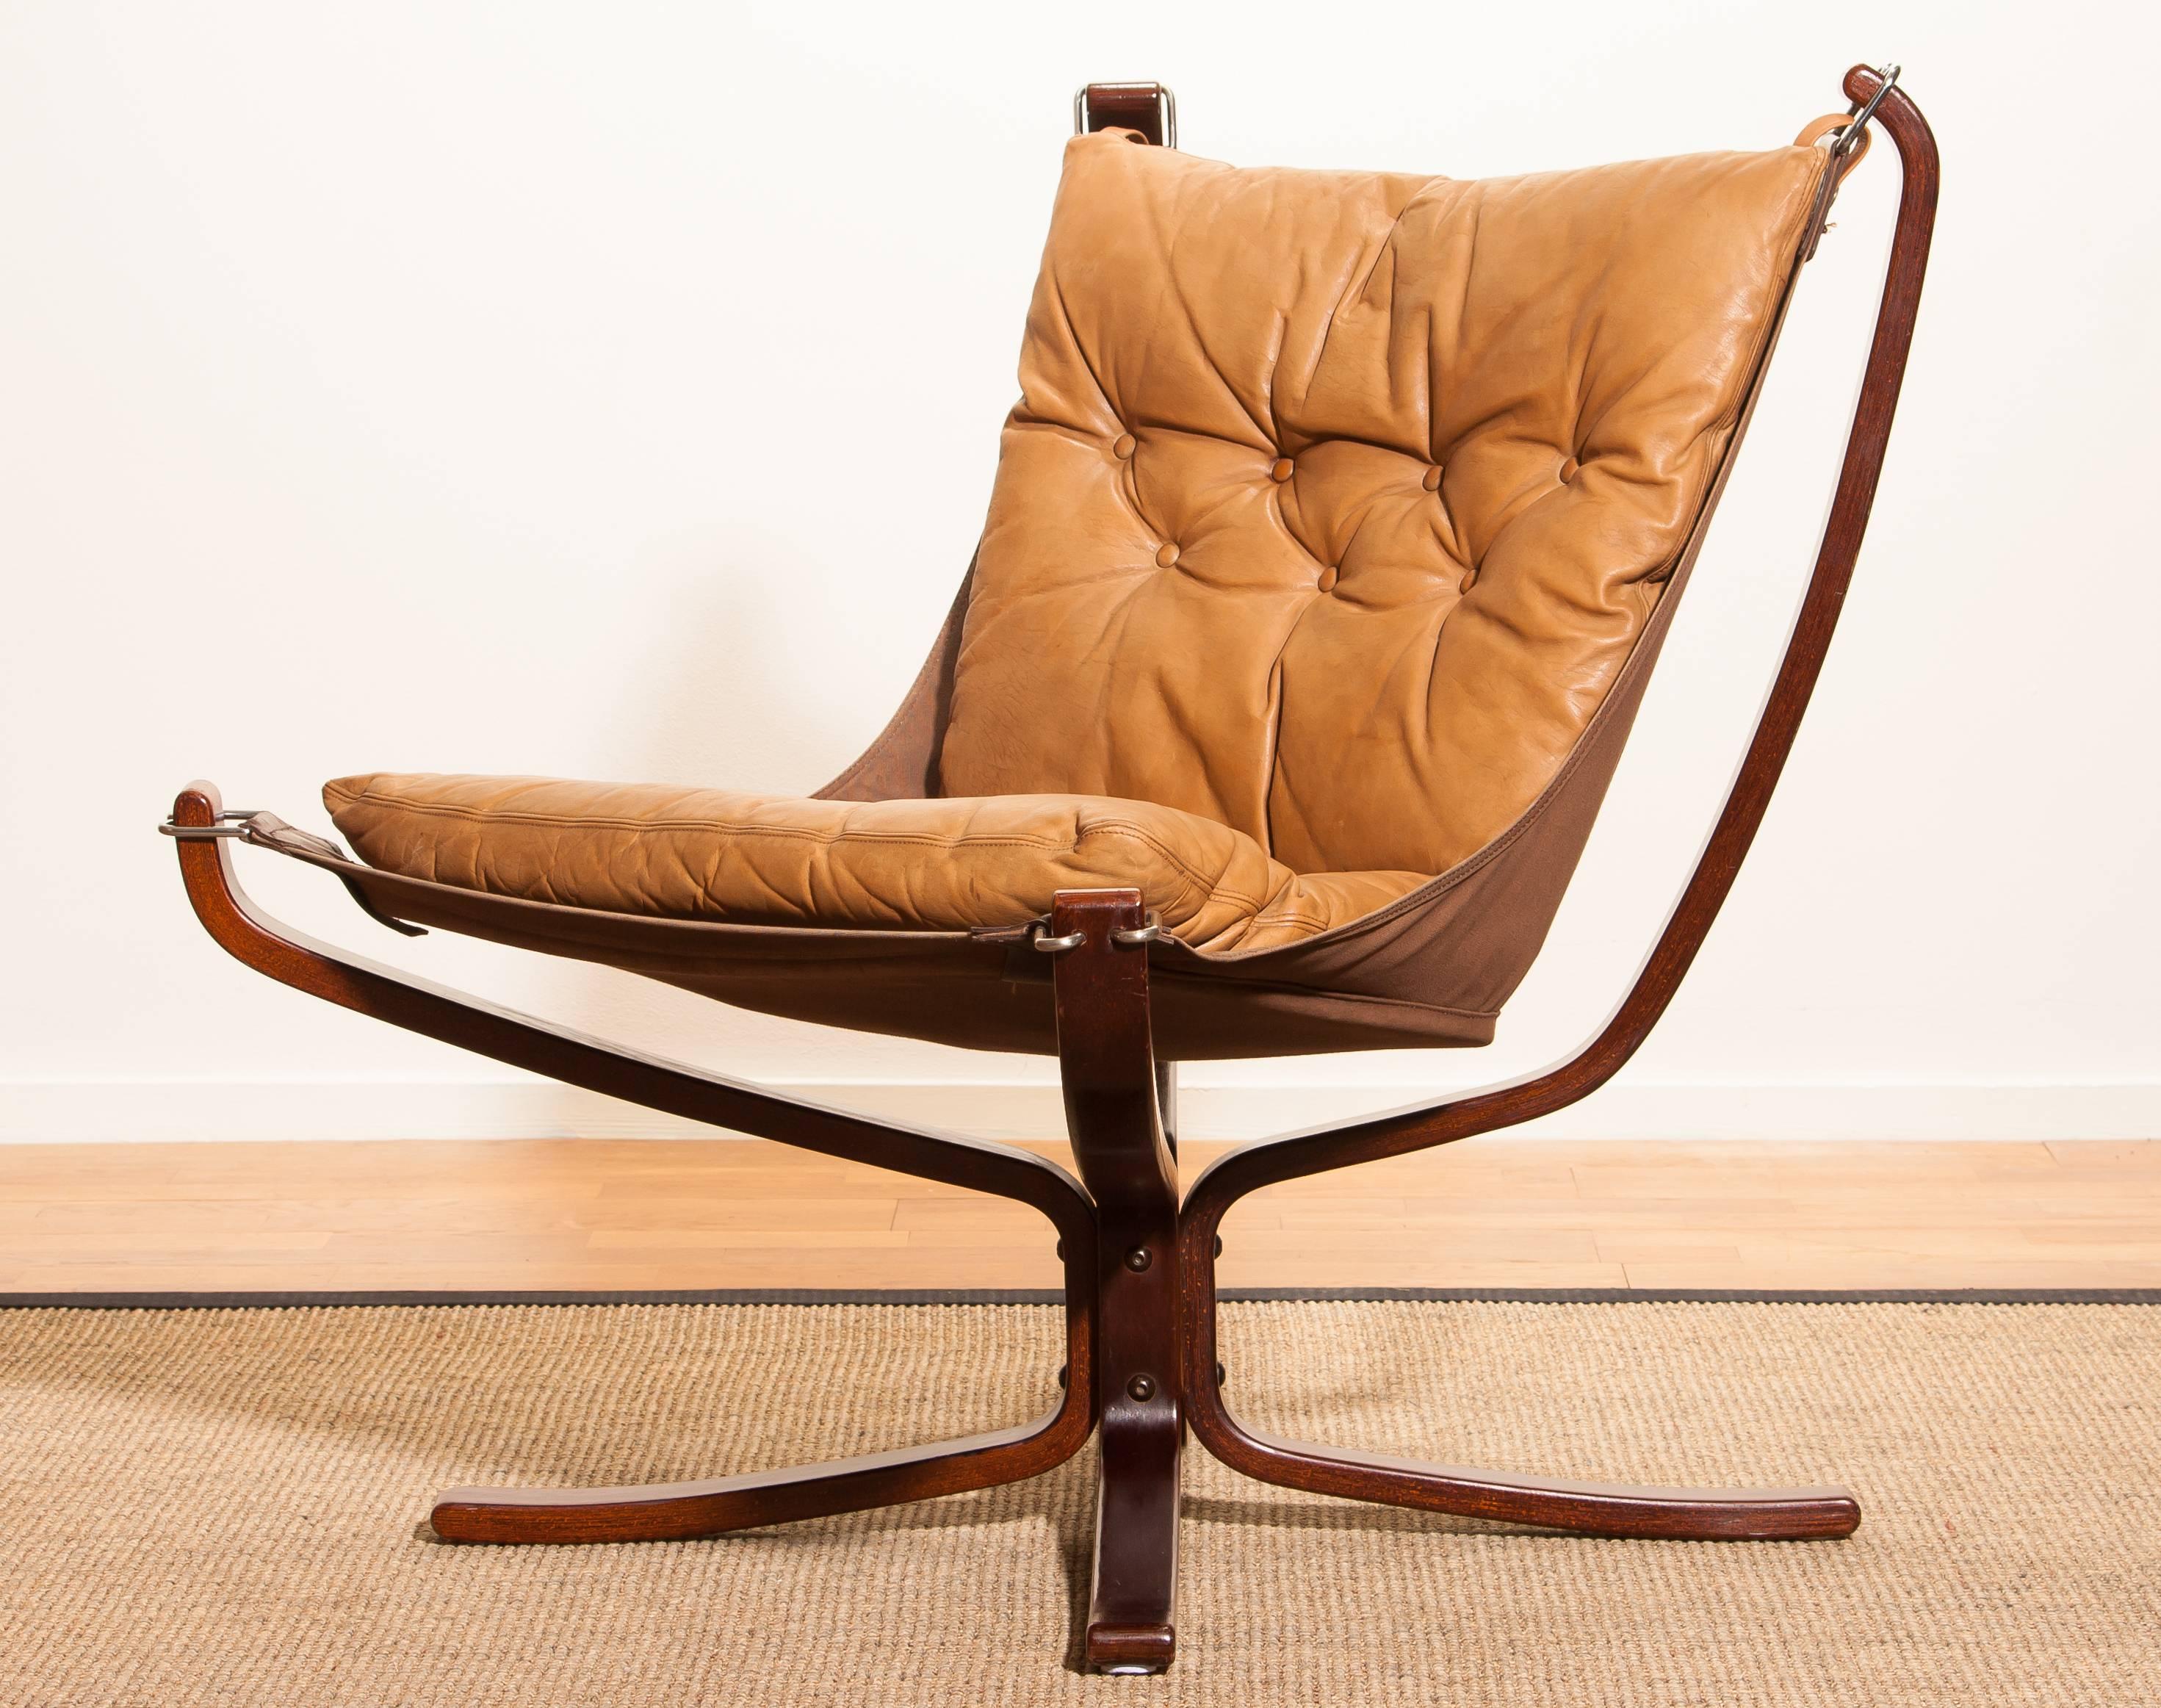 Wonderful armchair designed by Sigurd Ressell Norway.
The chair is in a very nice original condition.
Both, the camel leather seating as the wooden frame are in excellent condition.
Period 1970s.
Dimensions: H 80 cm, W 80 cm, D 75 cm, SH 40